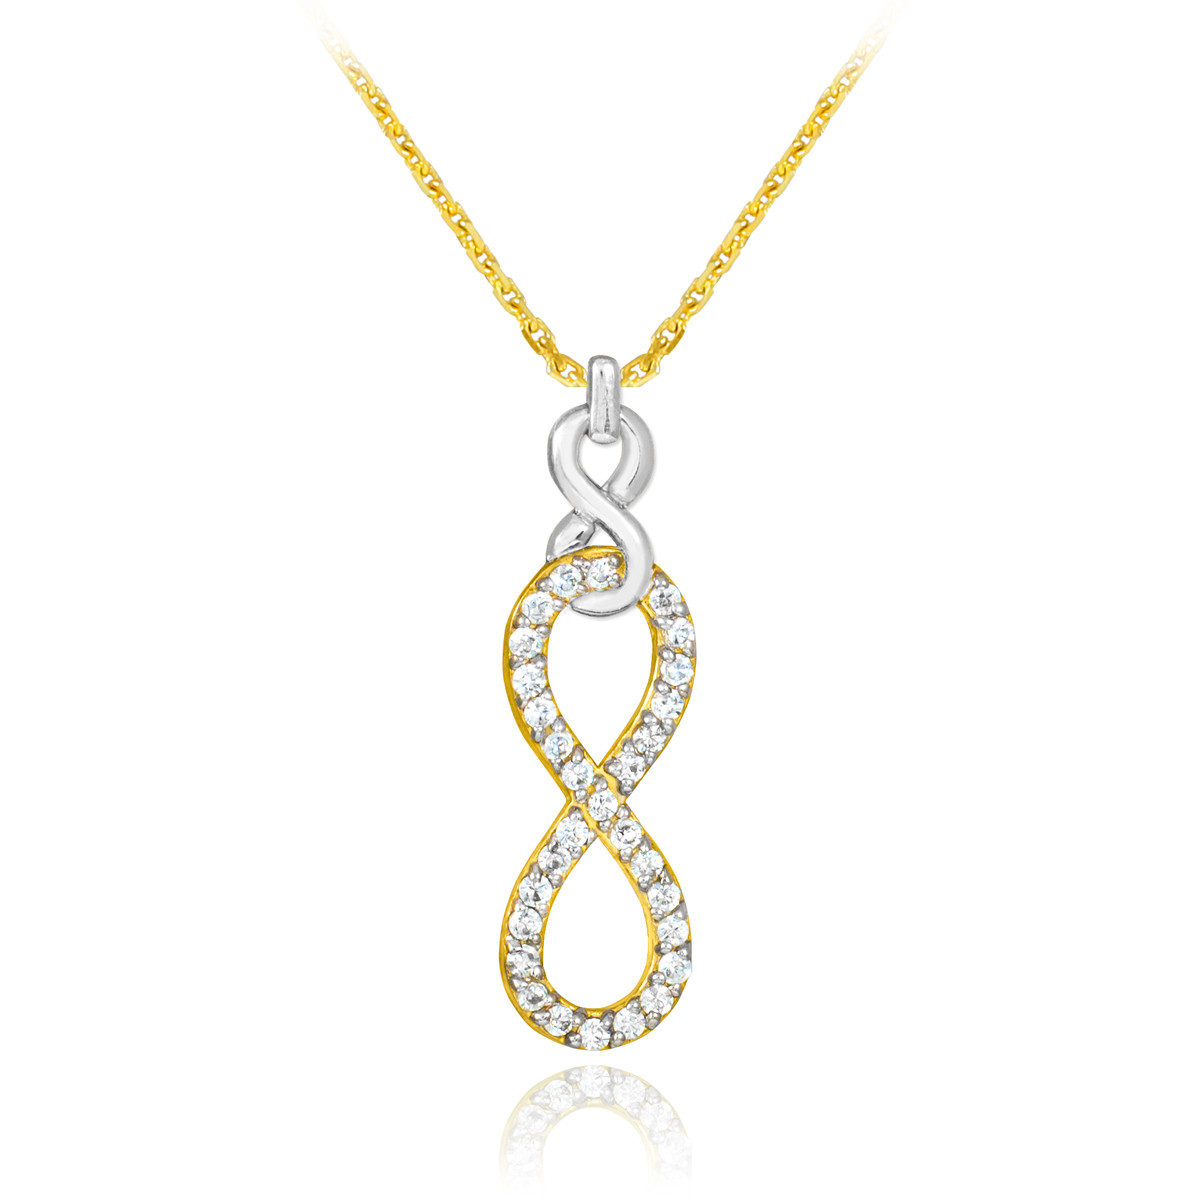 Vertical infinity diamond necklace in 14k yellow and white gold.